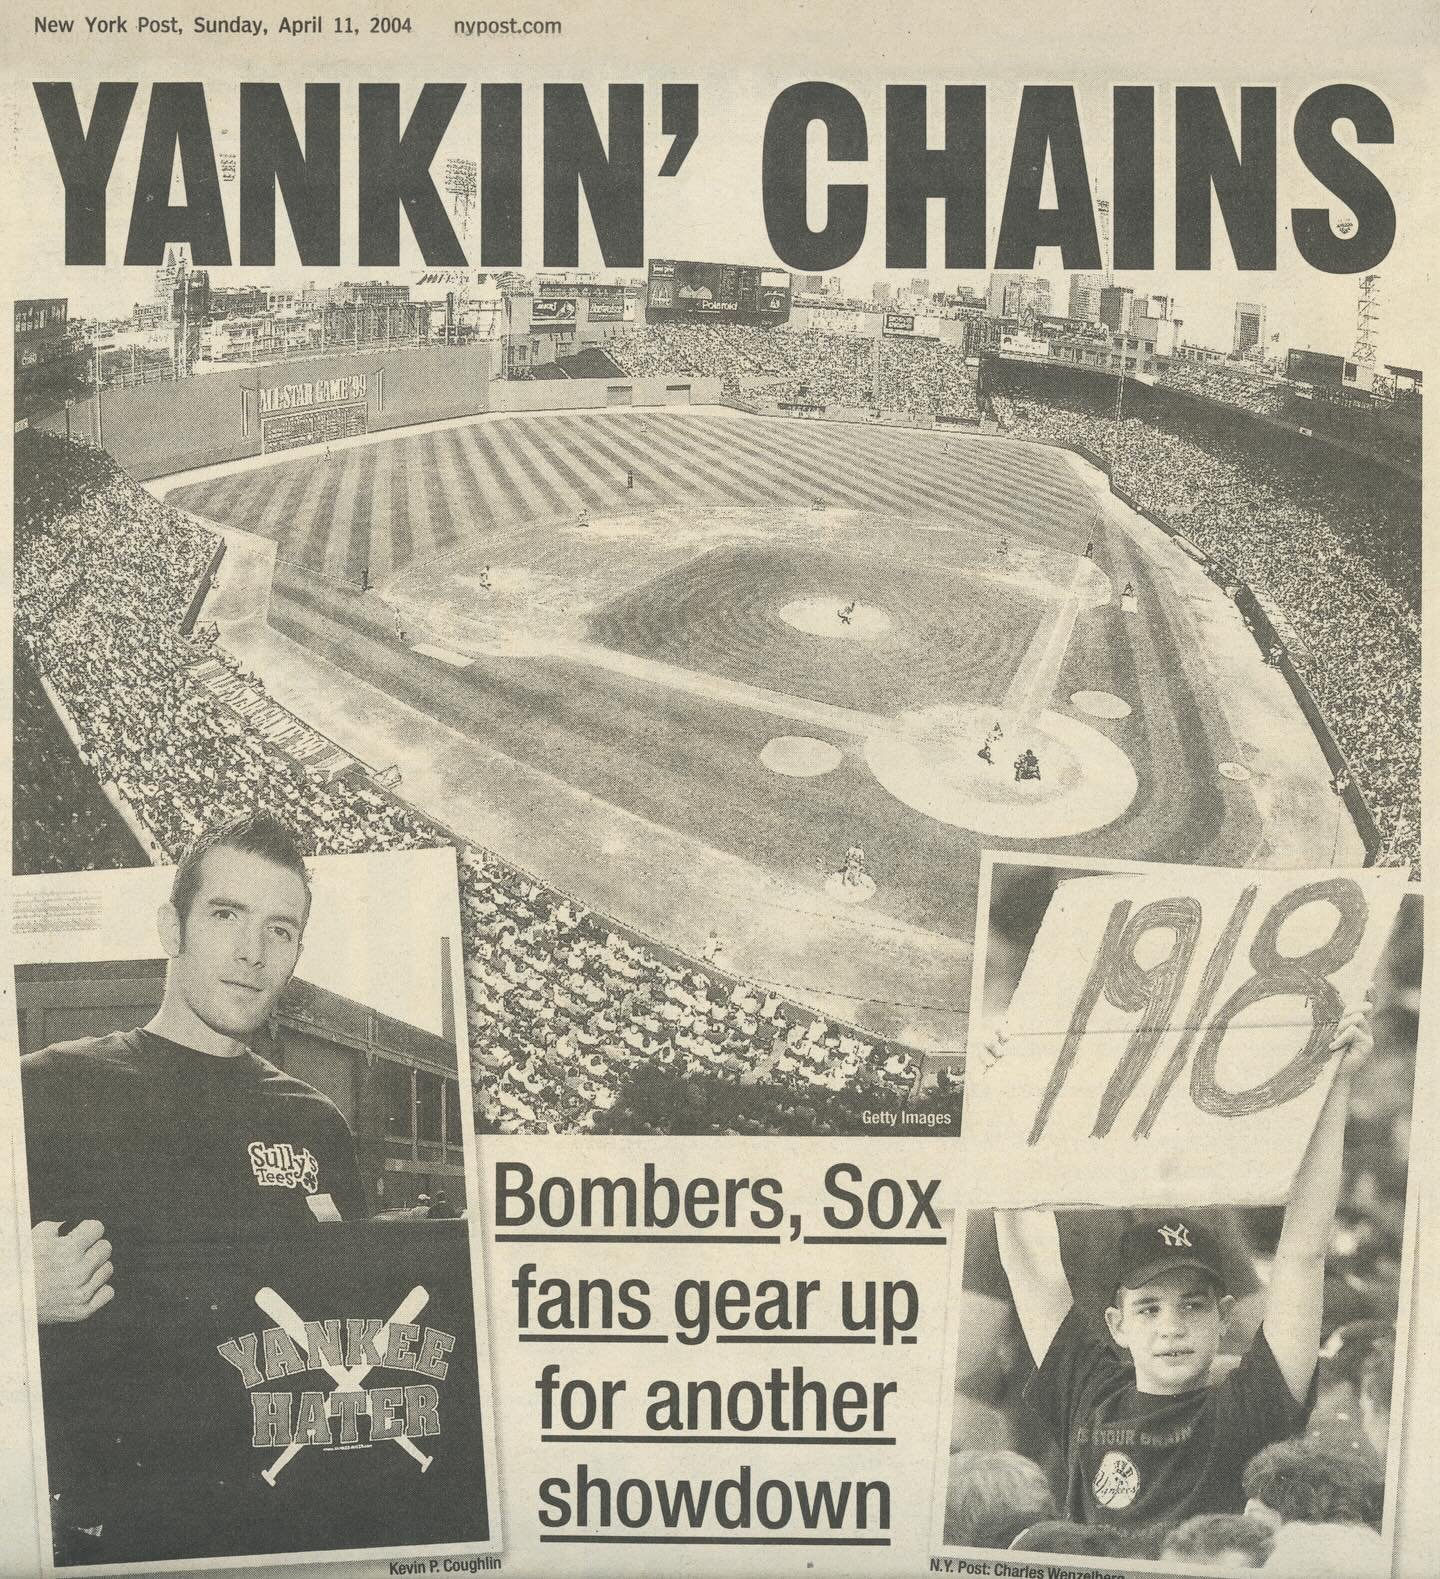 20 years ago today, the NY Post ran a story about the Red Sox / Yankees rivalry that included a photo of me selling &ldquo;Yankee Hater&rdquo; tees on the sidewalk outside of Fenway Park. Boston hadn&rsquo;t won a World Series in 86 years and Sox fan